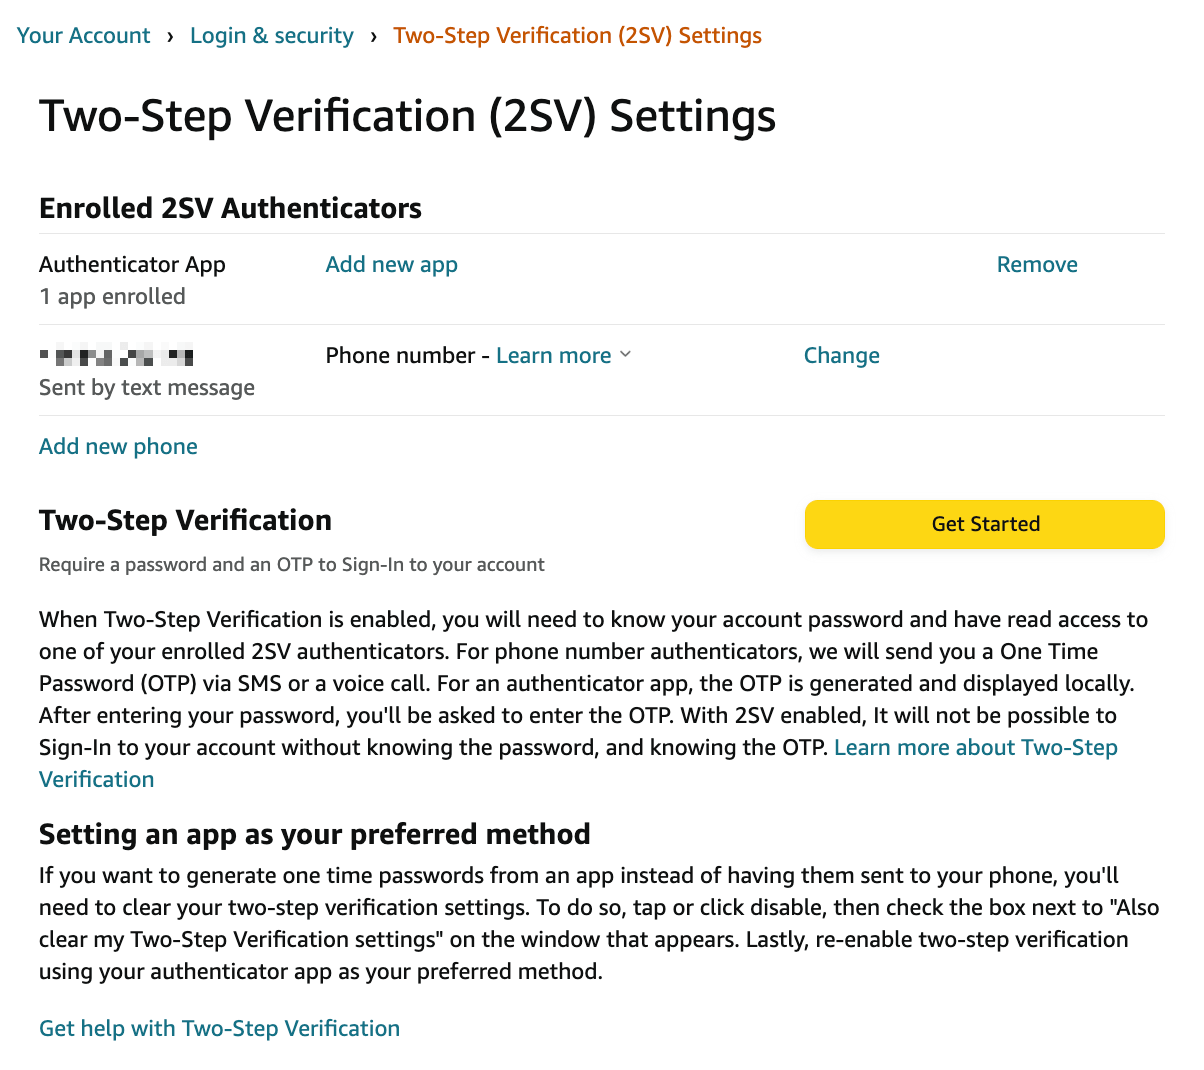 New occasional 2SV checks with verified email - News & Alerts